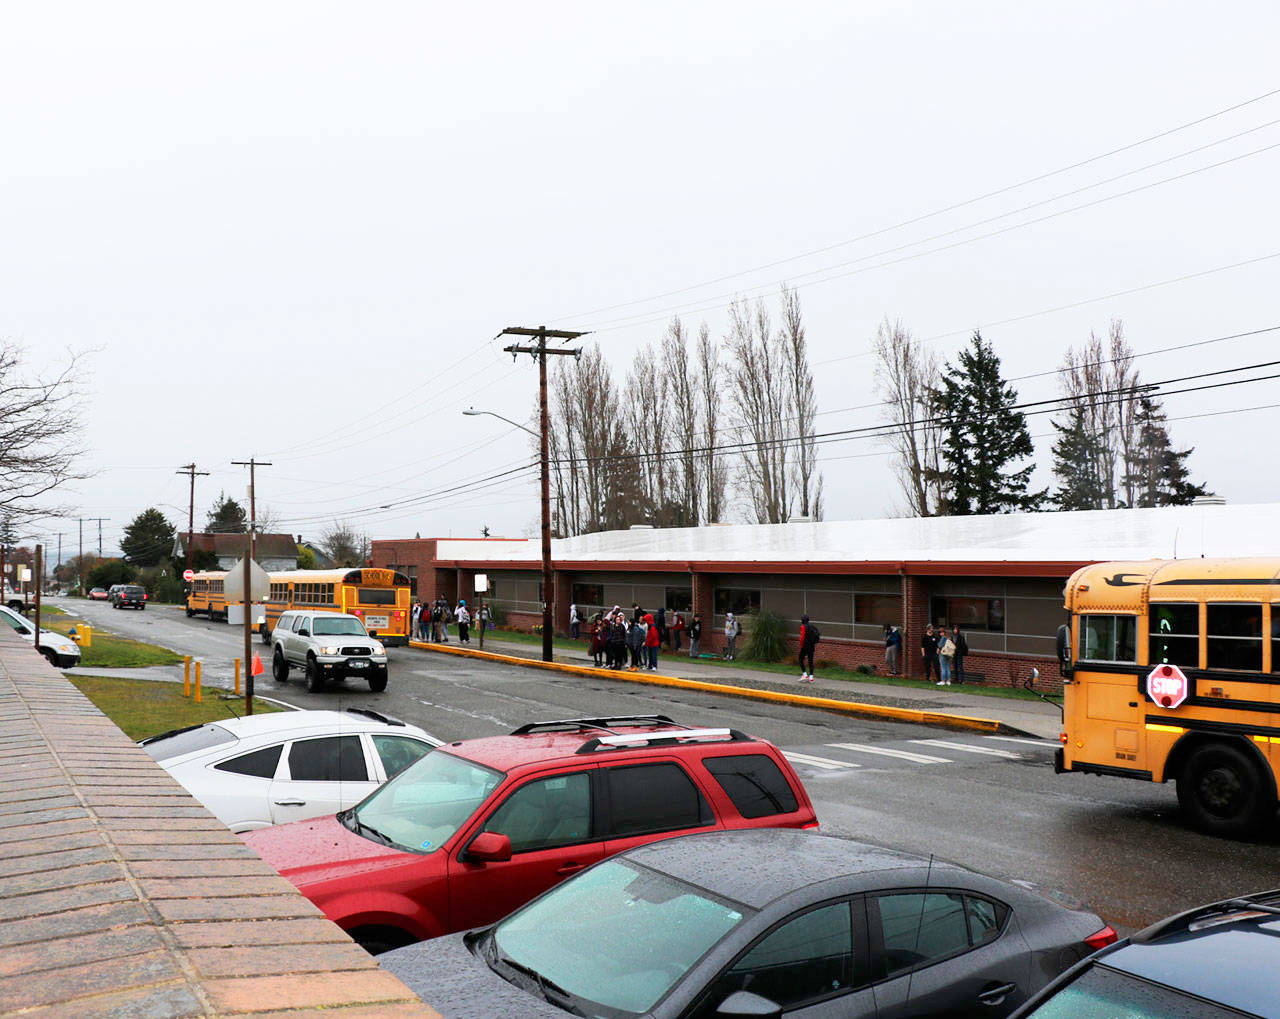 Port Townsend High School students wait to board their buses home on Friday afternoon. The students will be on a six-week break beginning Tuesday following a decision made by Gov. Jay Inslee, in an effort to tamper down the spread of COVID 19. (Ken Park/Peninsula Daily News)